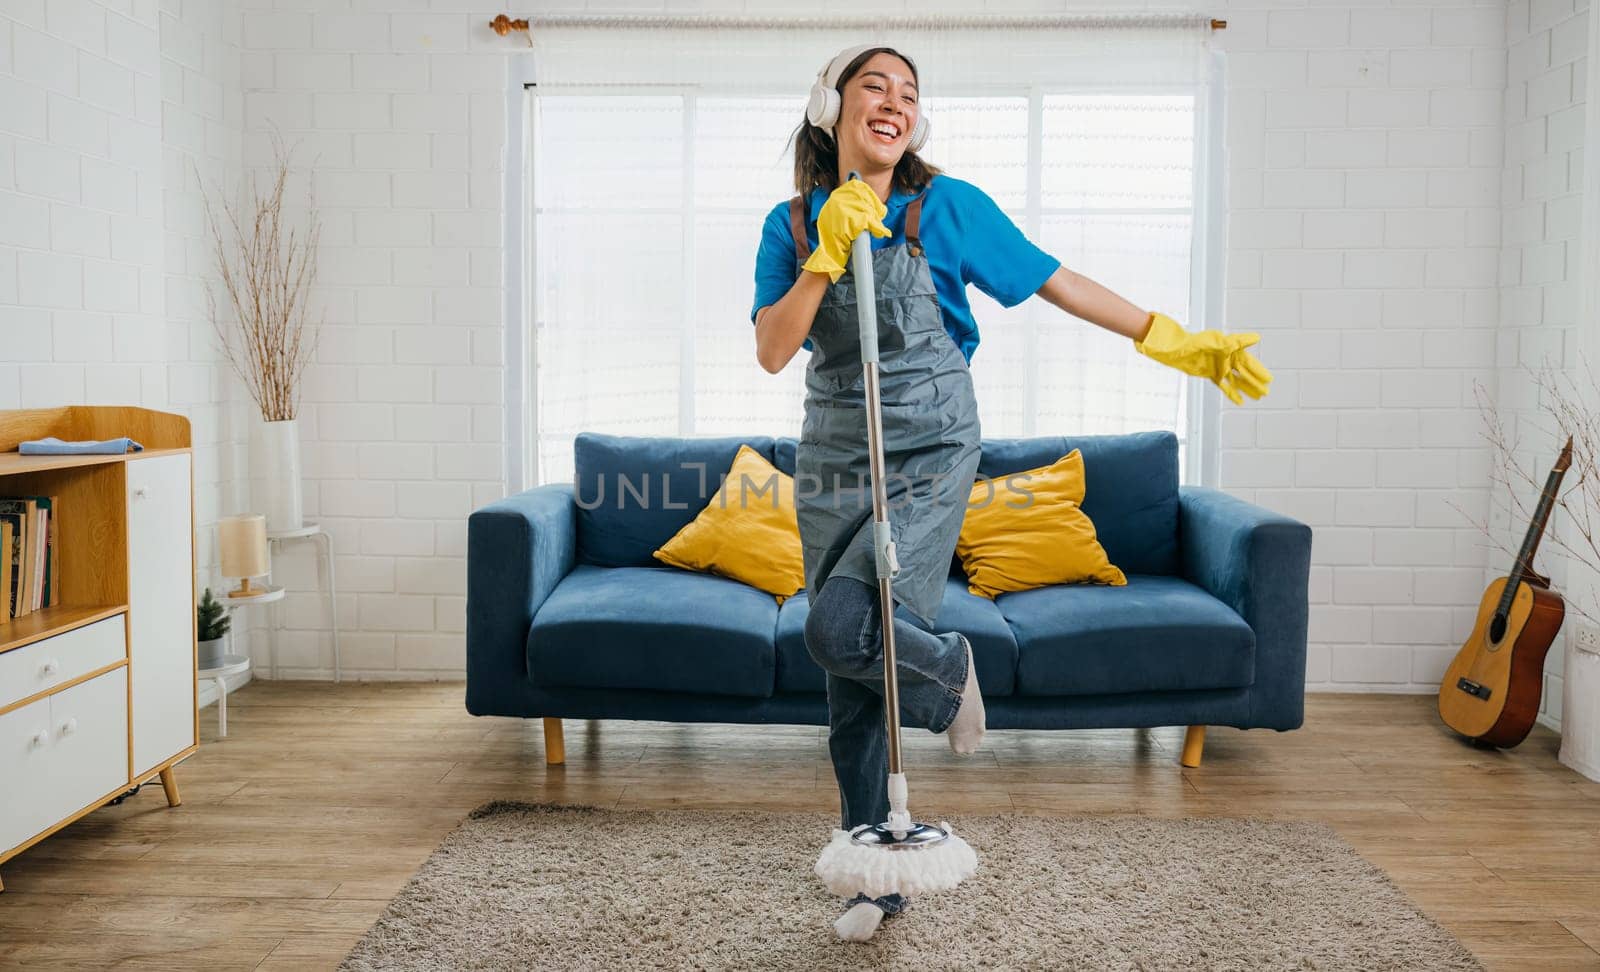 Happy young housewife enjoys singing her favorite song with mop as microphone during cleanup making housework fun. Dancing and cleaning in living room cheerful maid singing and enjoying her chores.